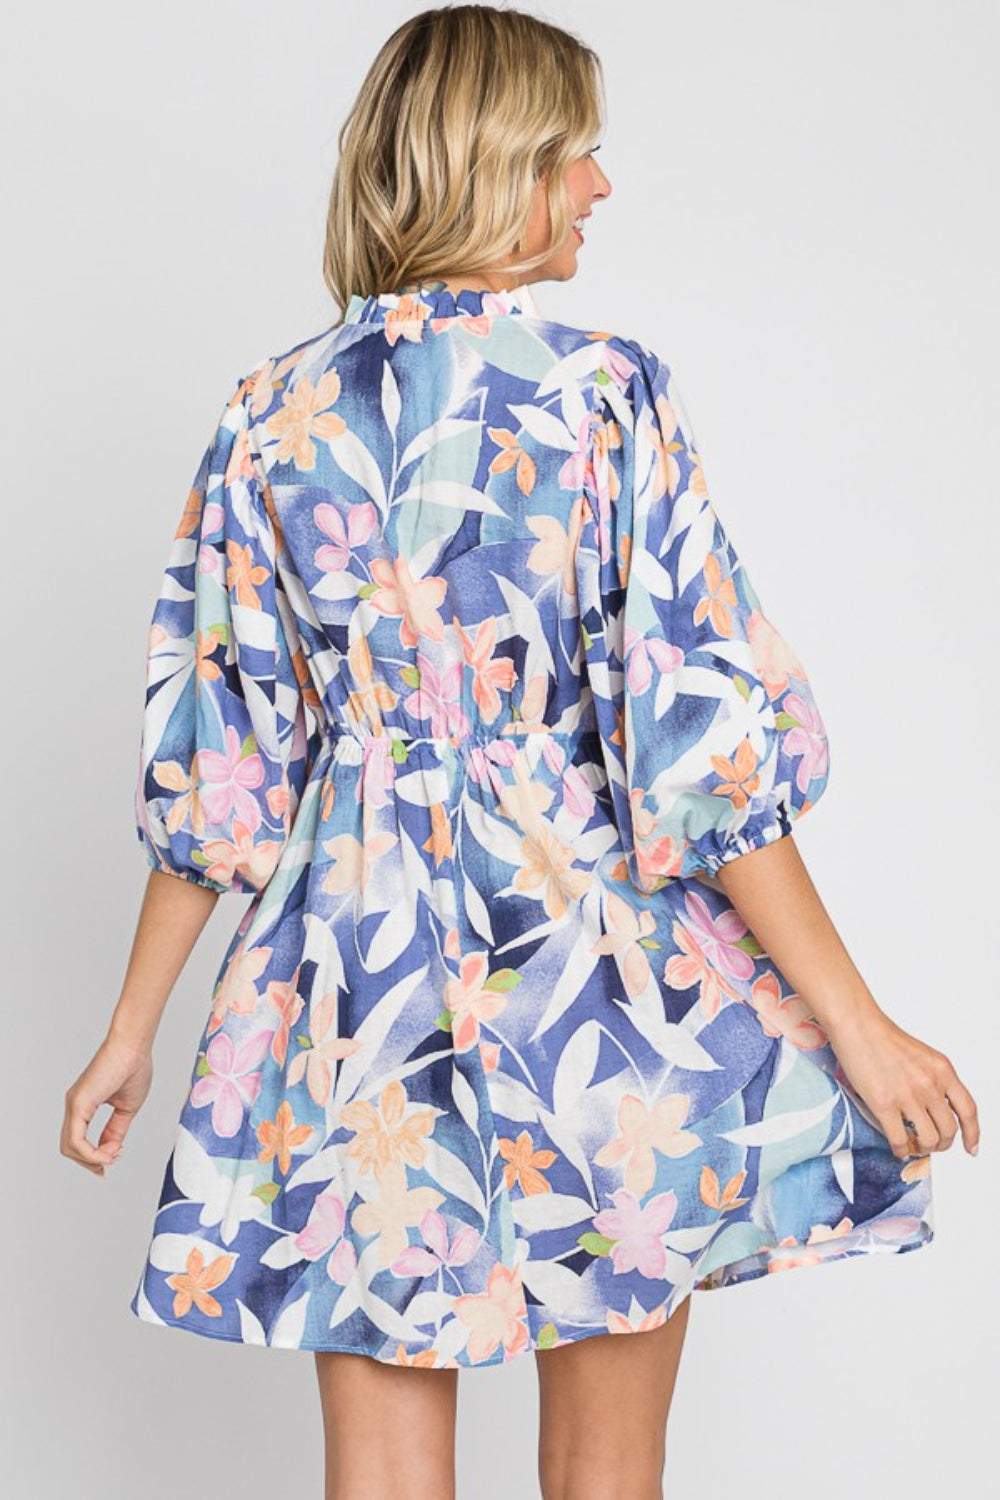 Skylight Floral Mini Dress - Cheeky Chic Boutique